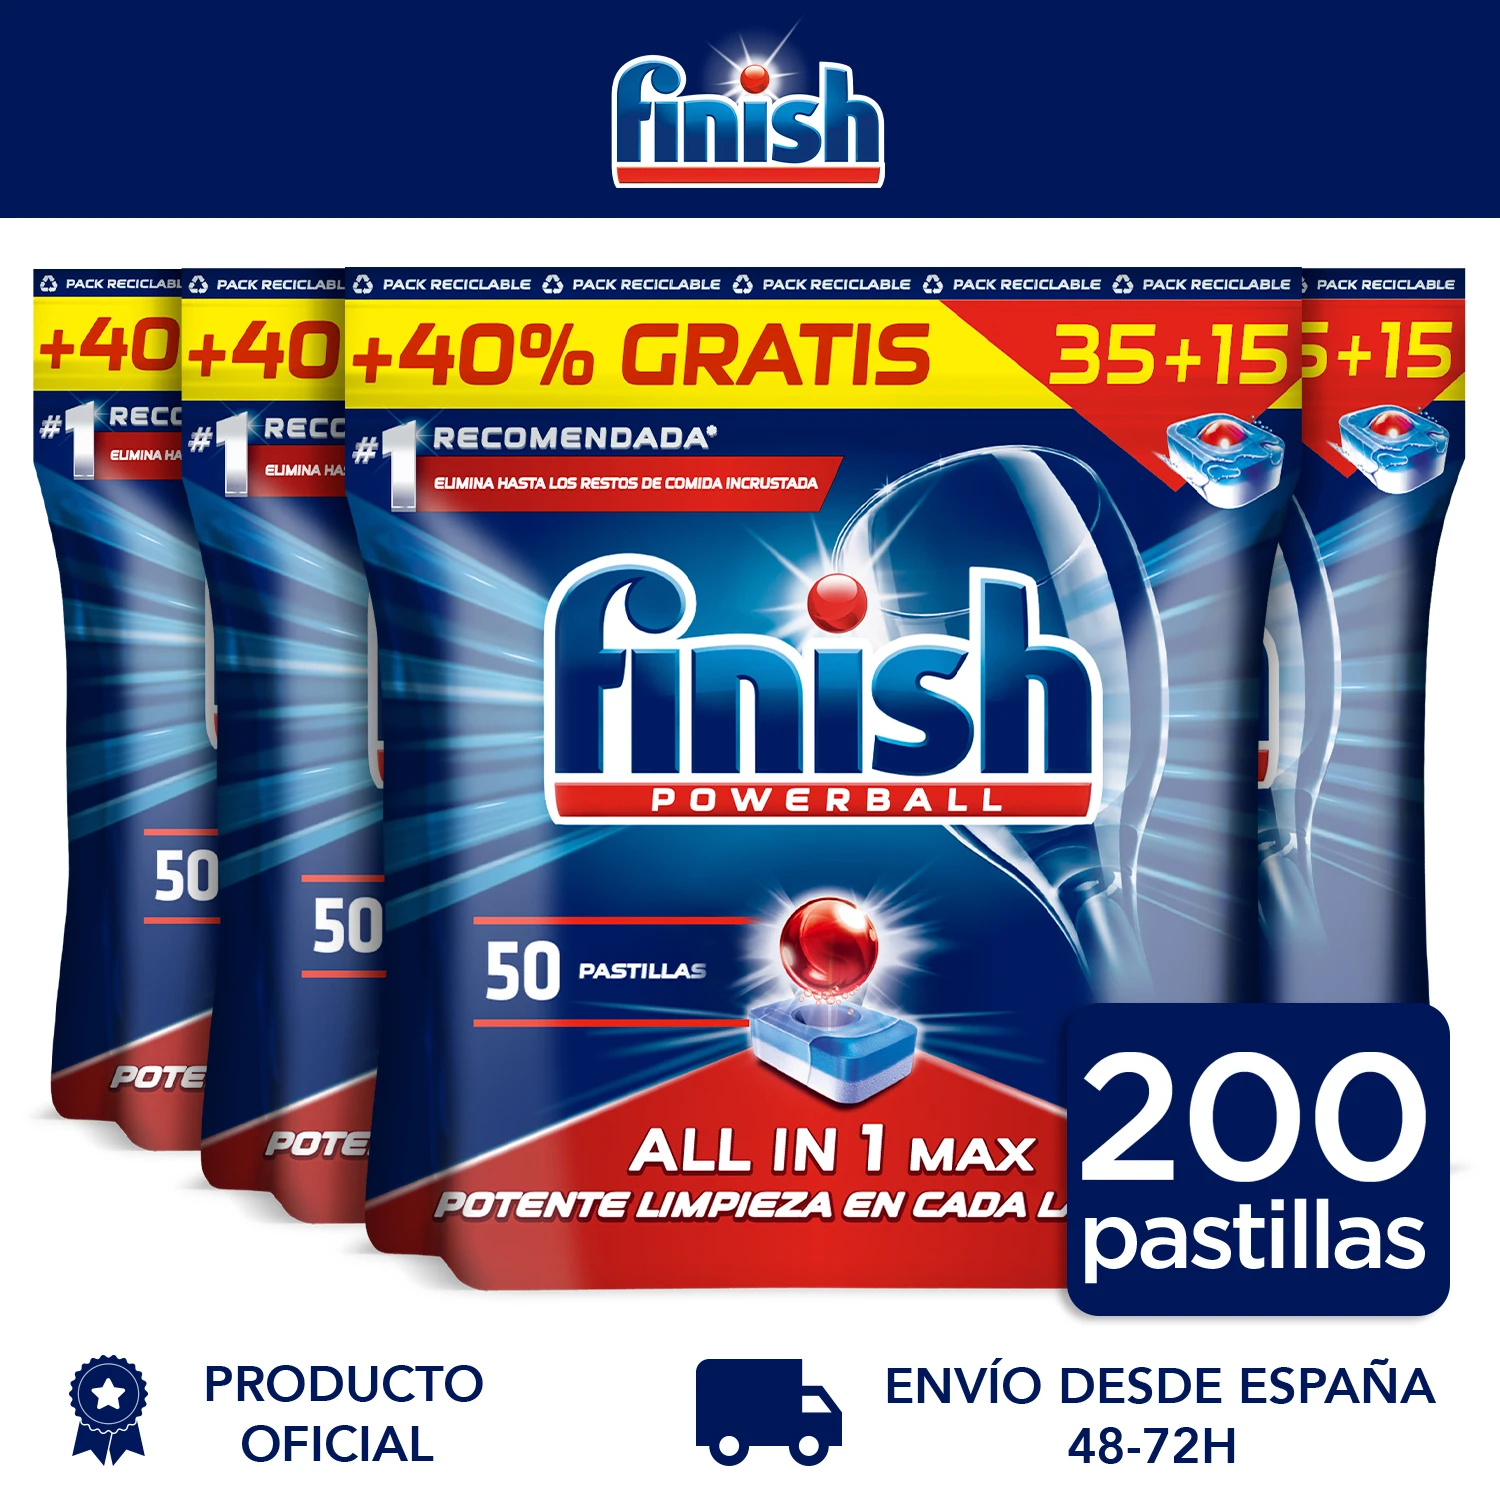 Finish Powerball All in 1 Max, dishwasher pads All in one, lemon scent-4 Pack-200 tablets